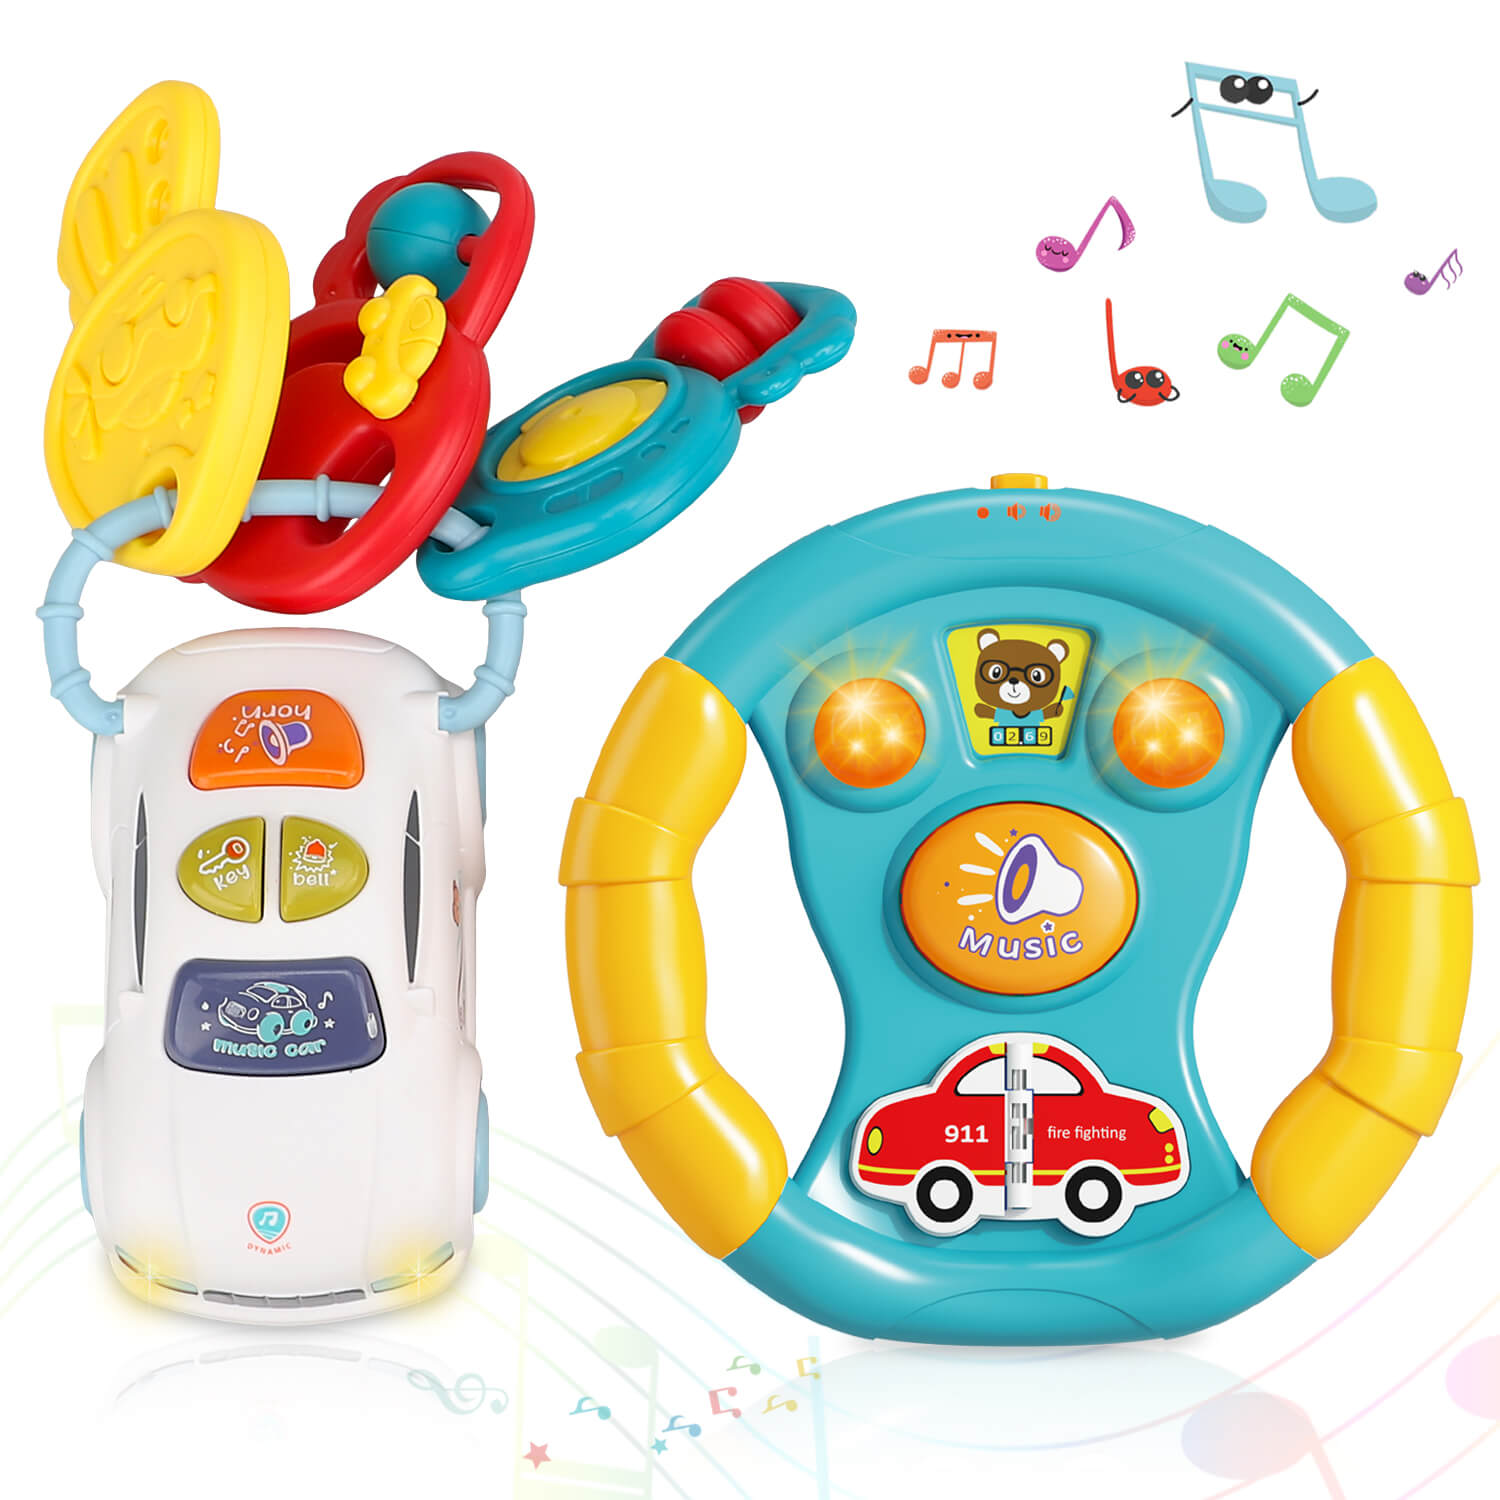 Toddler Driving Steering Wheel Toy and Car Keys with Music